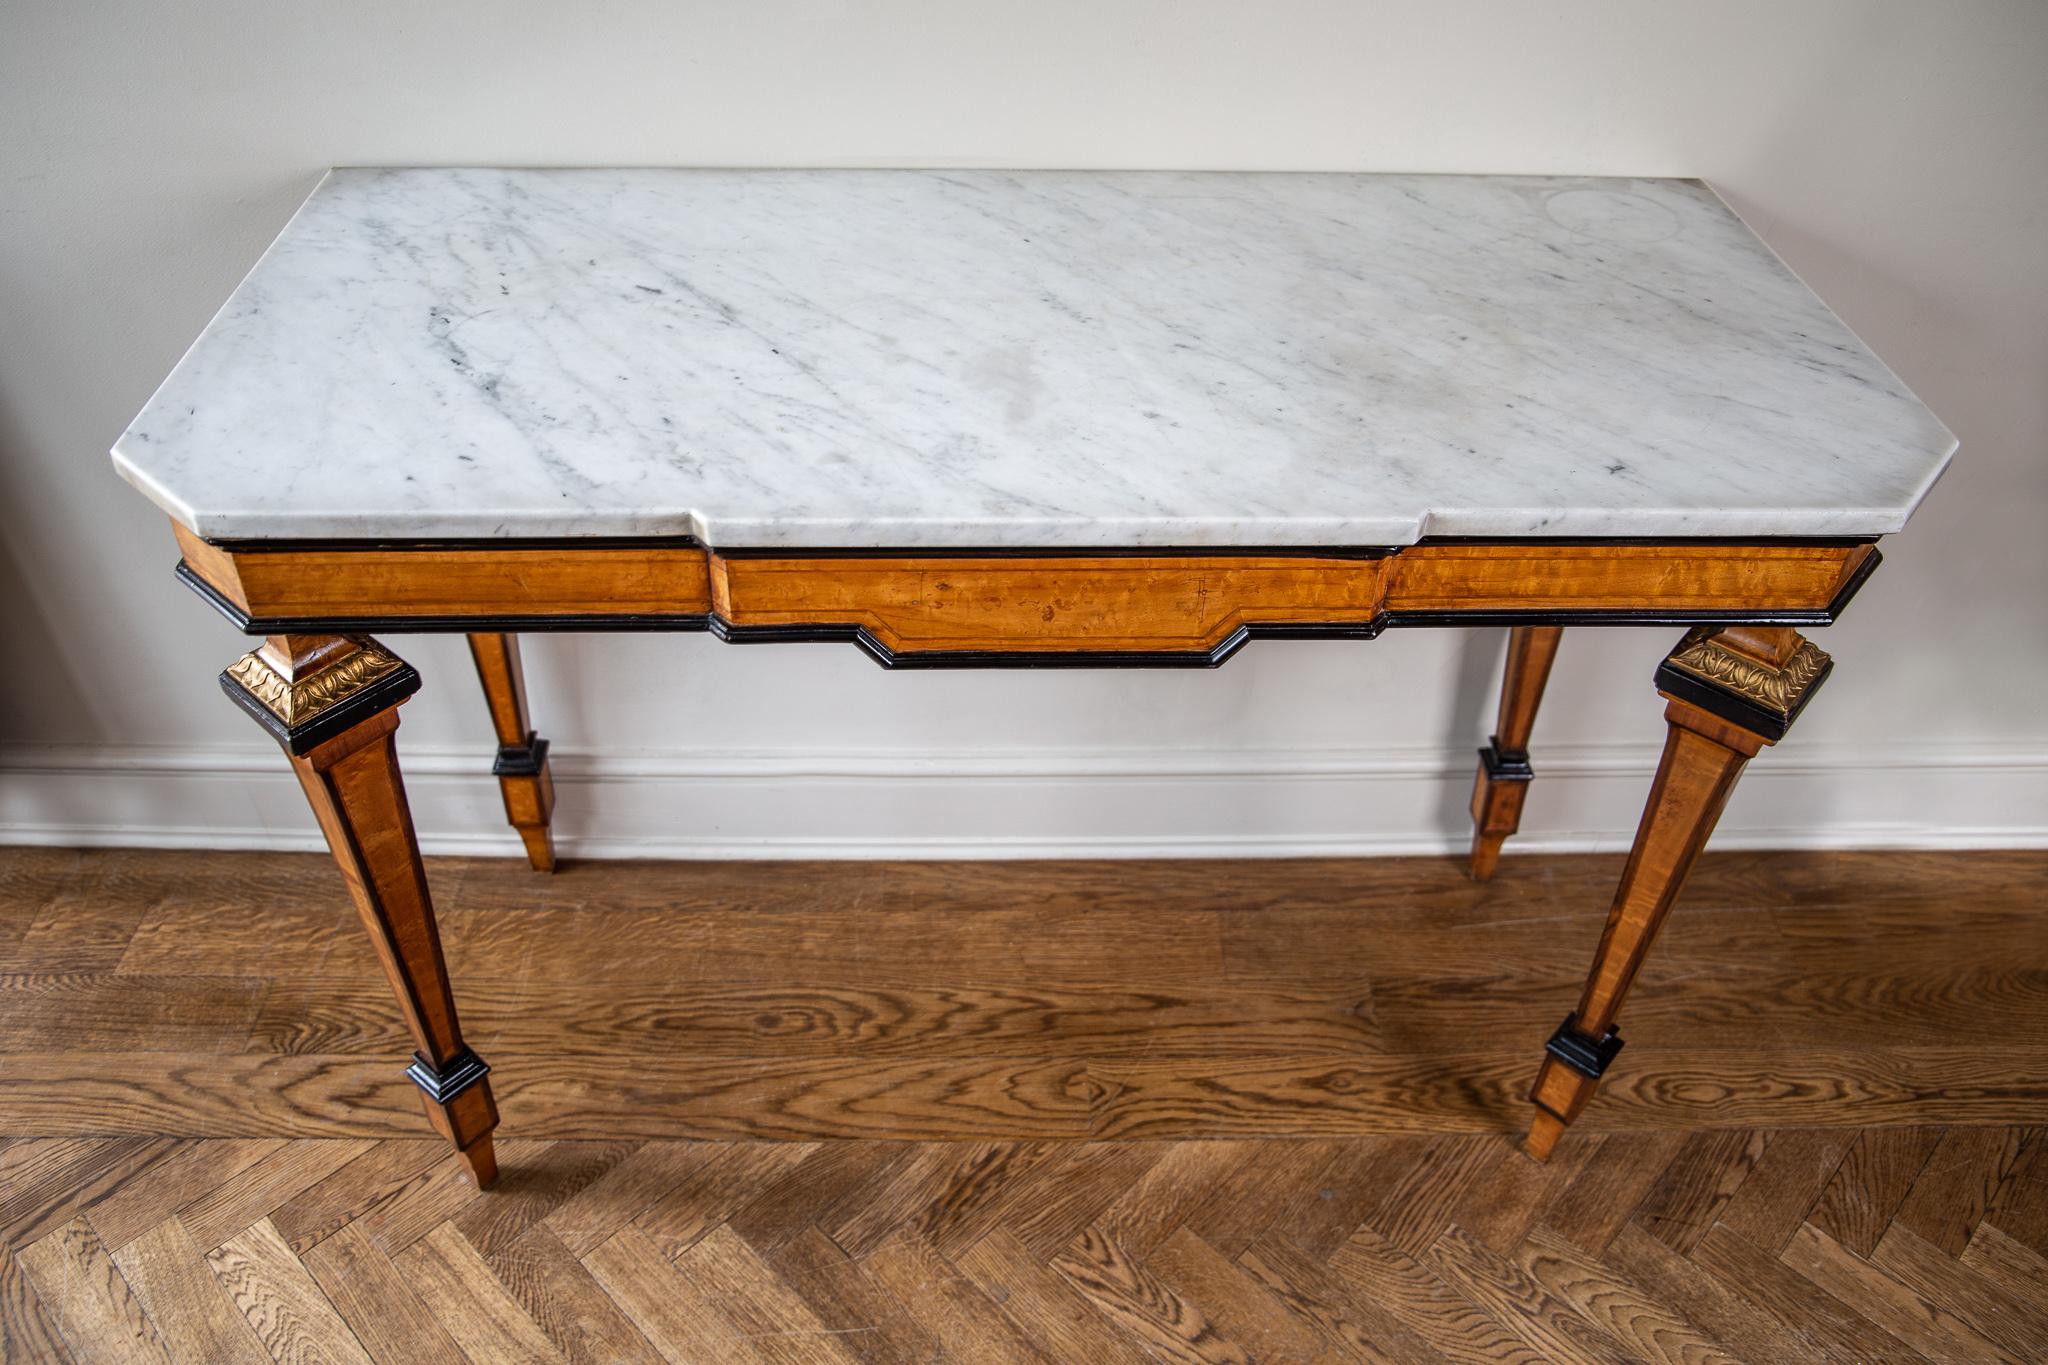 Renaissance Revival Italian Marble Topped Console Table with Graphic Lines, circa 1850